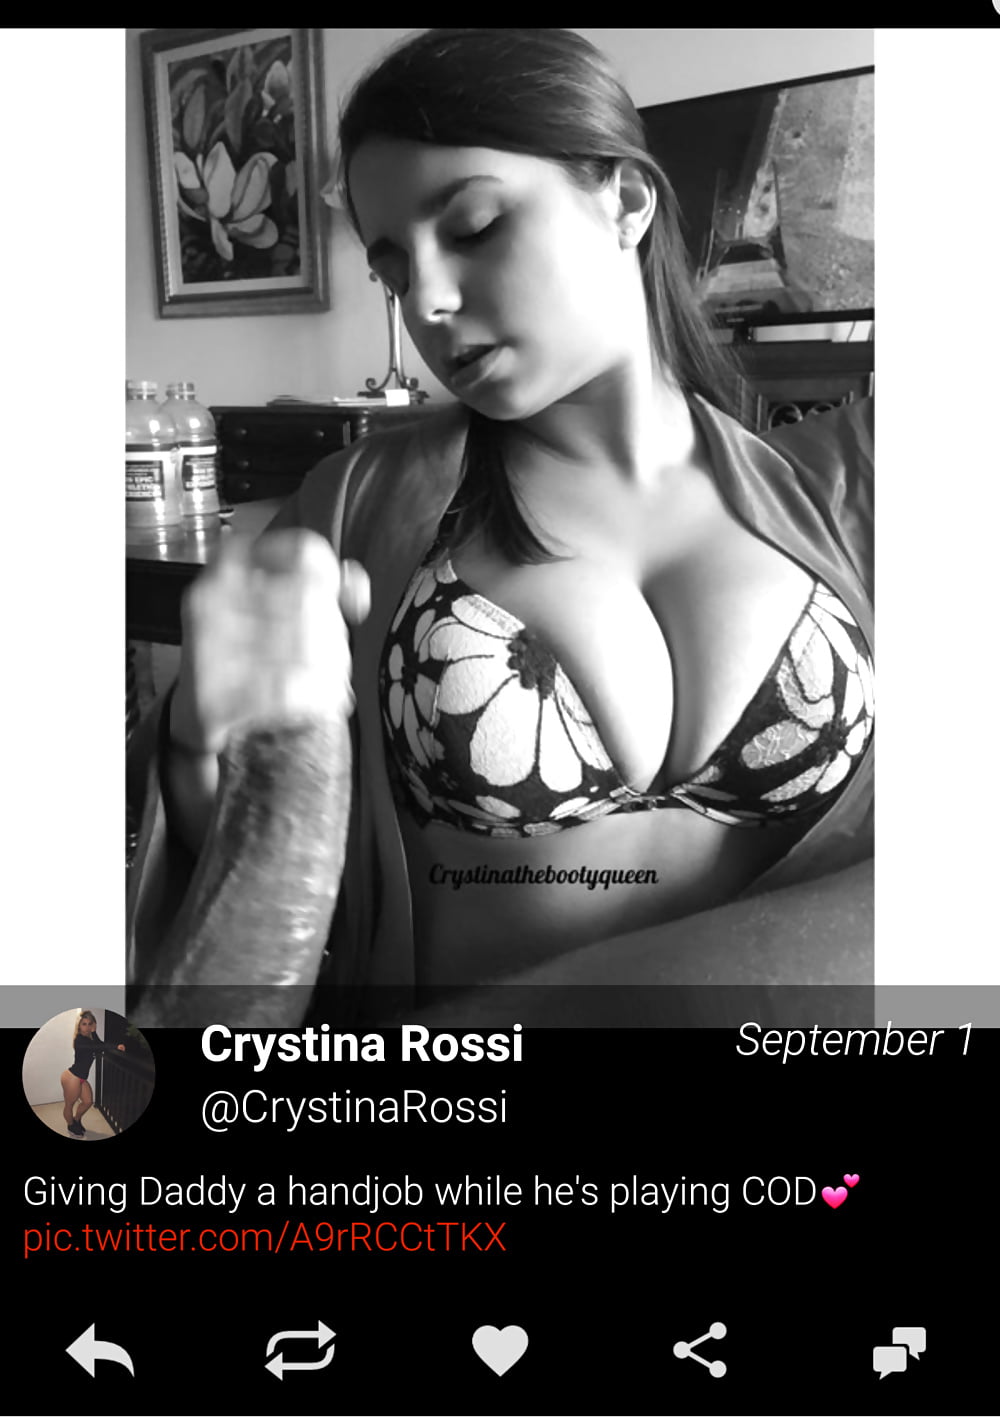 Crystina the booty queen twitter